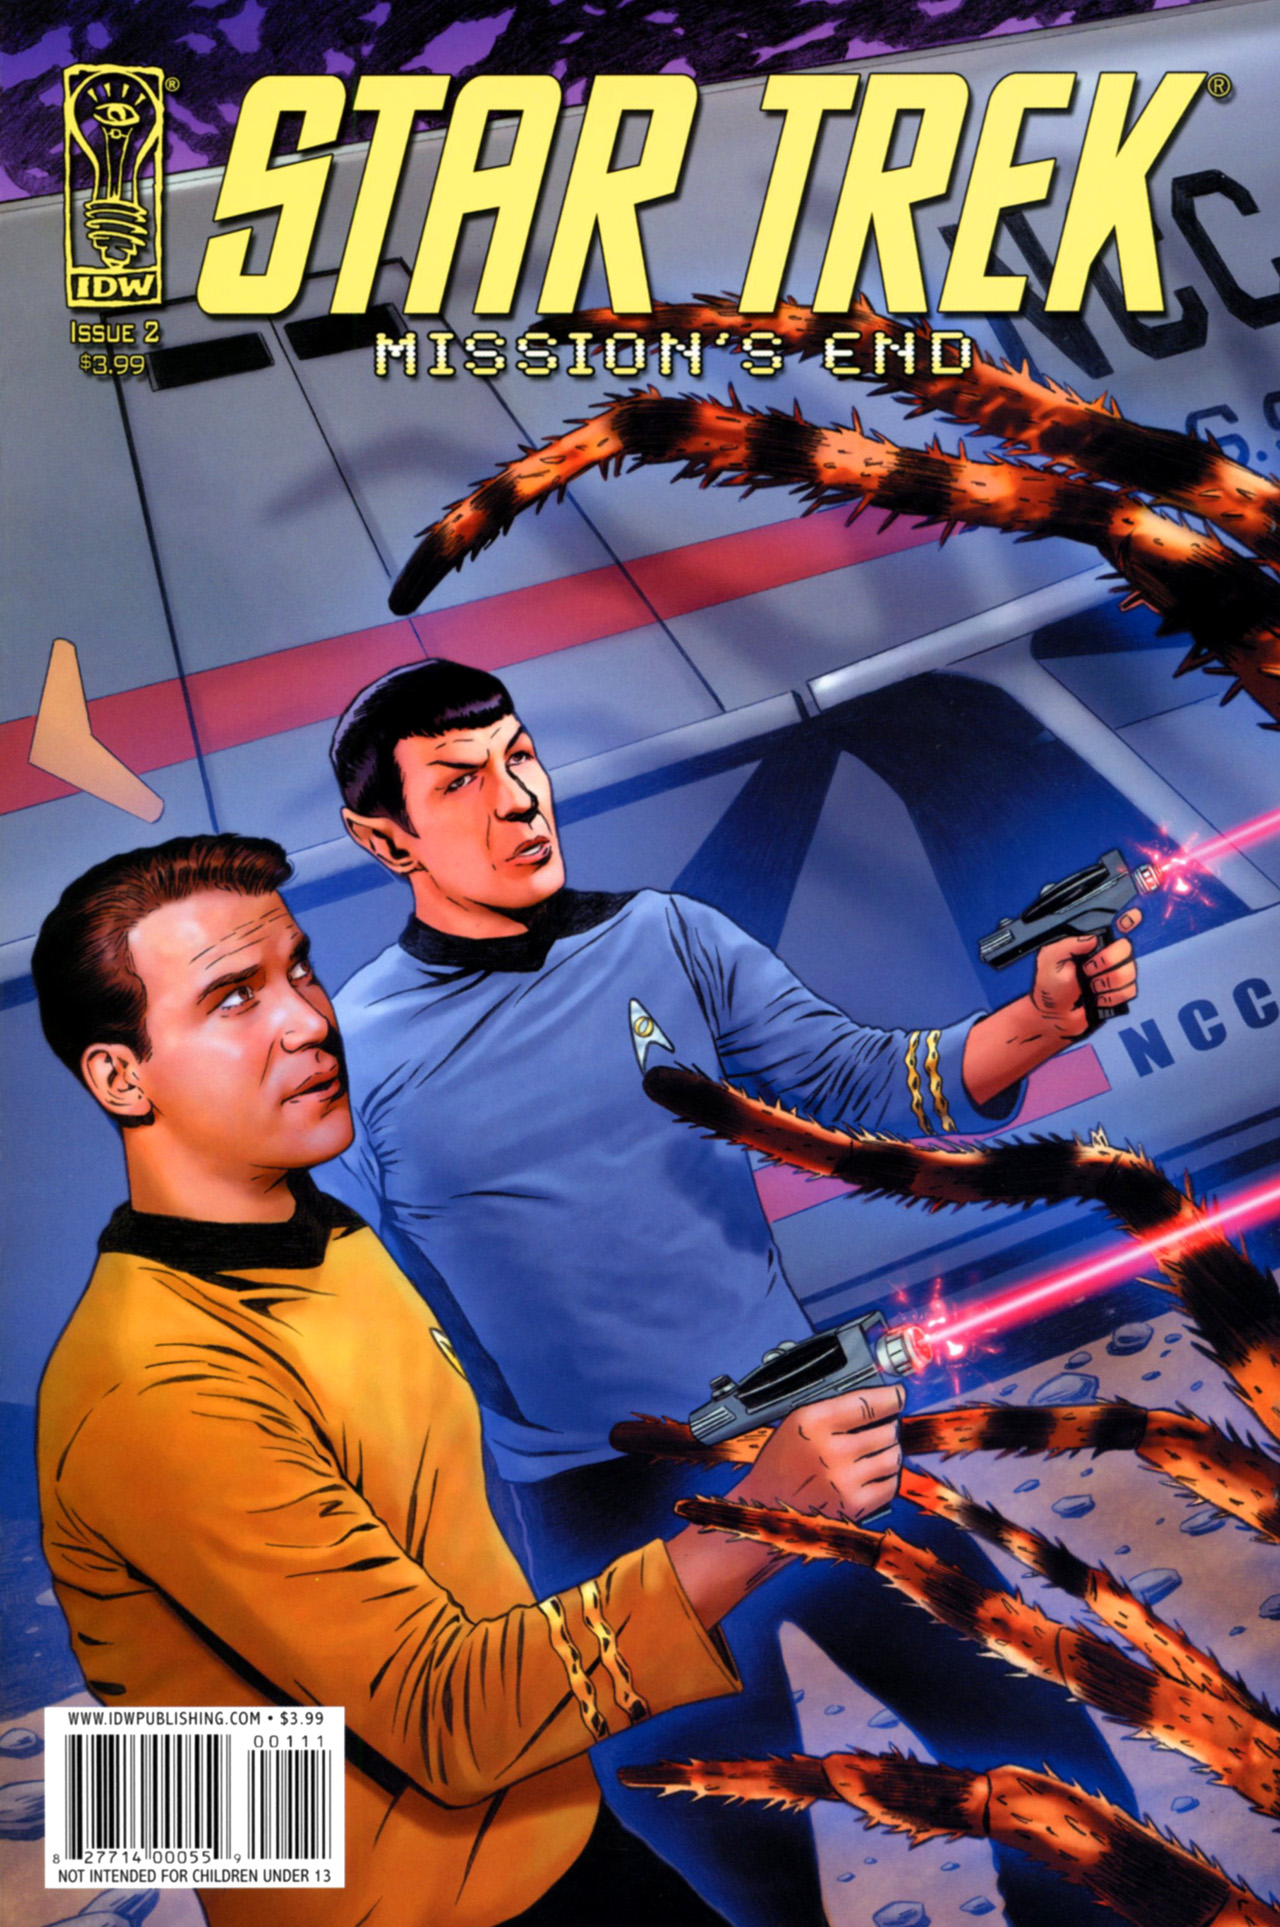 Read online Star Trek: Mission's End comic -  Issue #2 - 1